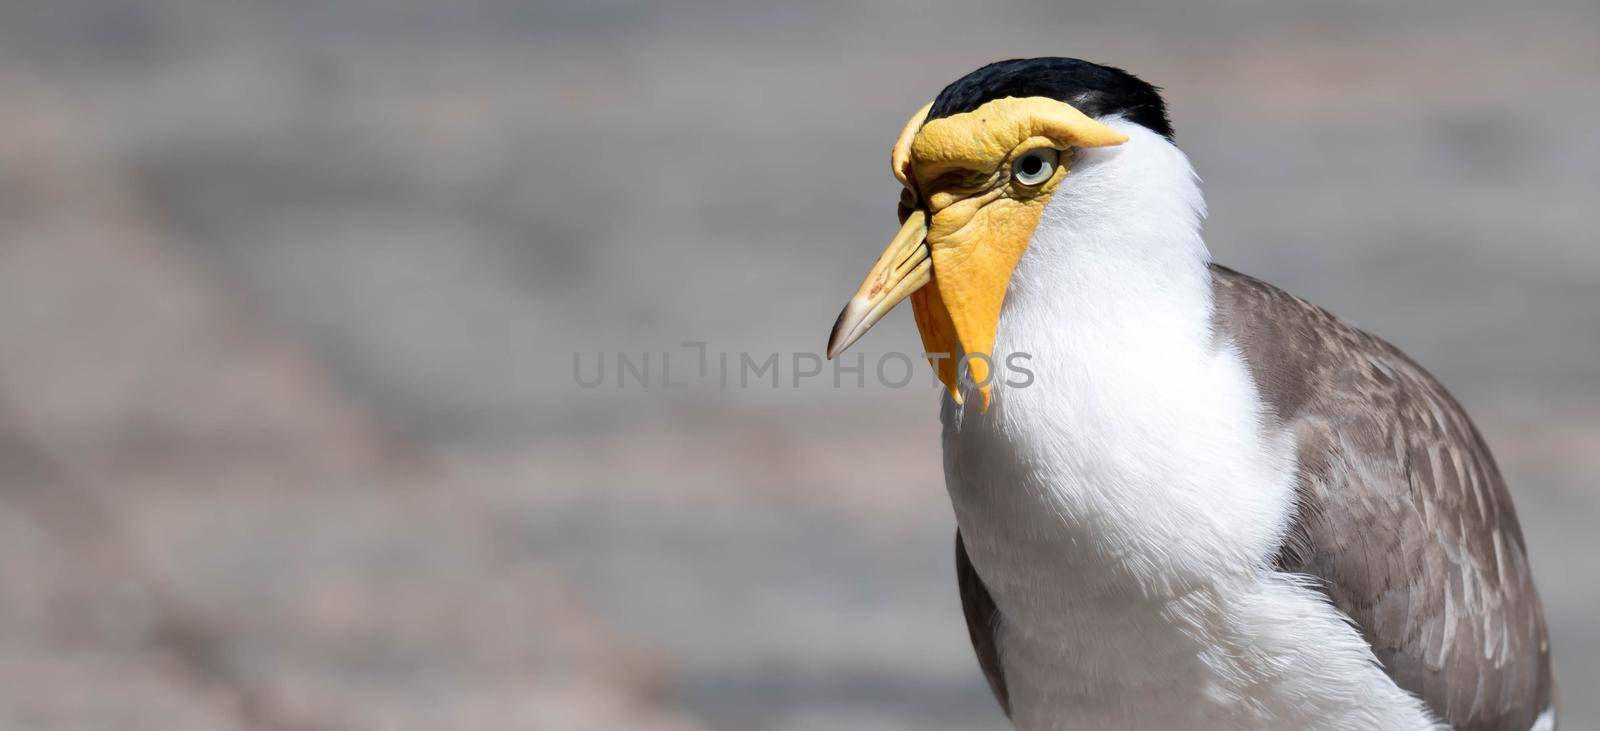 A Close up shot of Masked lapwing (Vanellus miles), commonly known in Asia as derpy bird or durian faced bird